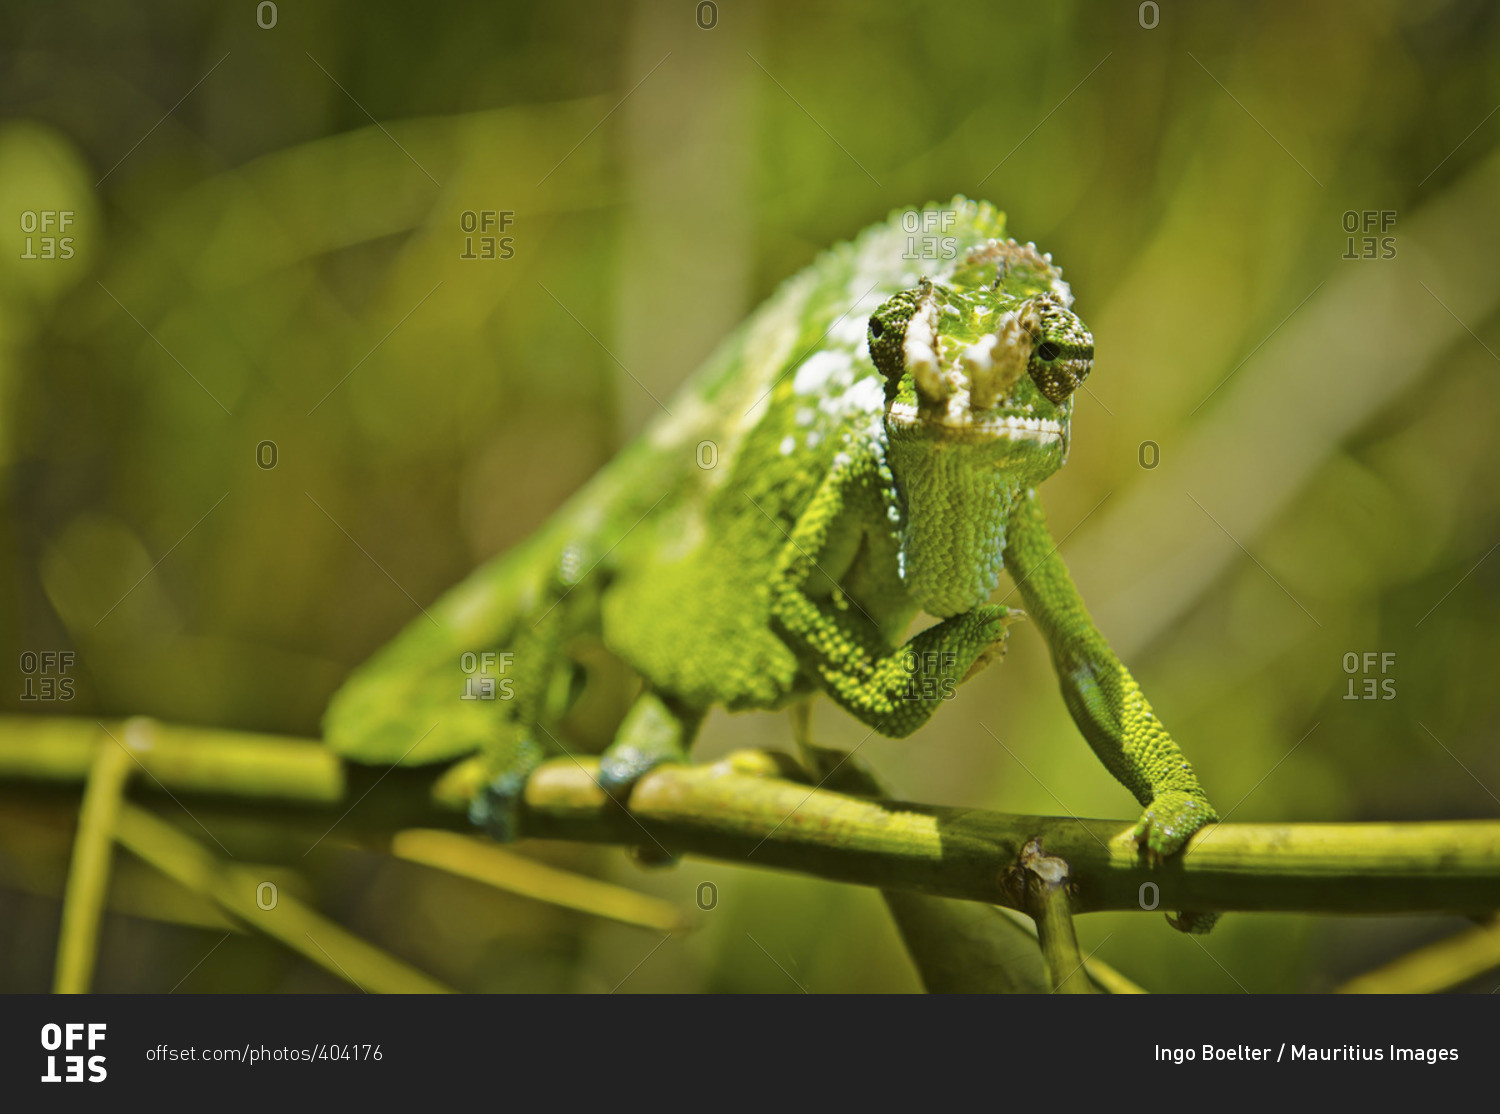 A two horned chameleon perched on a twig